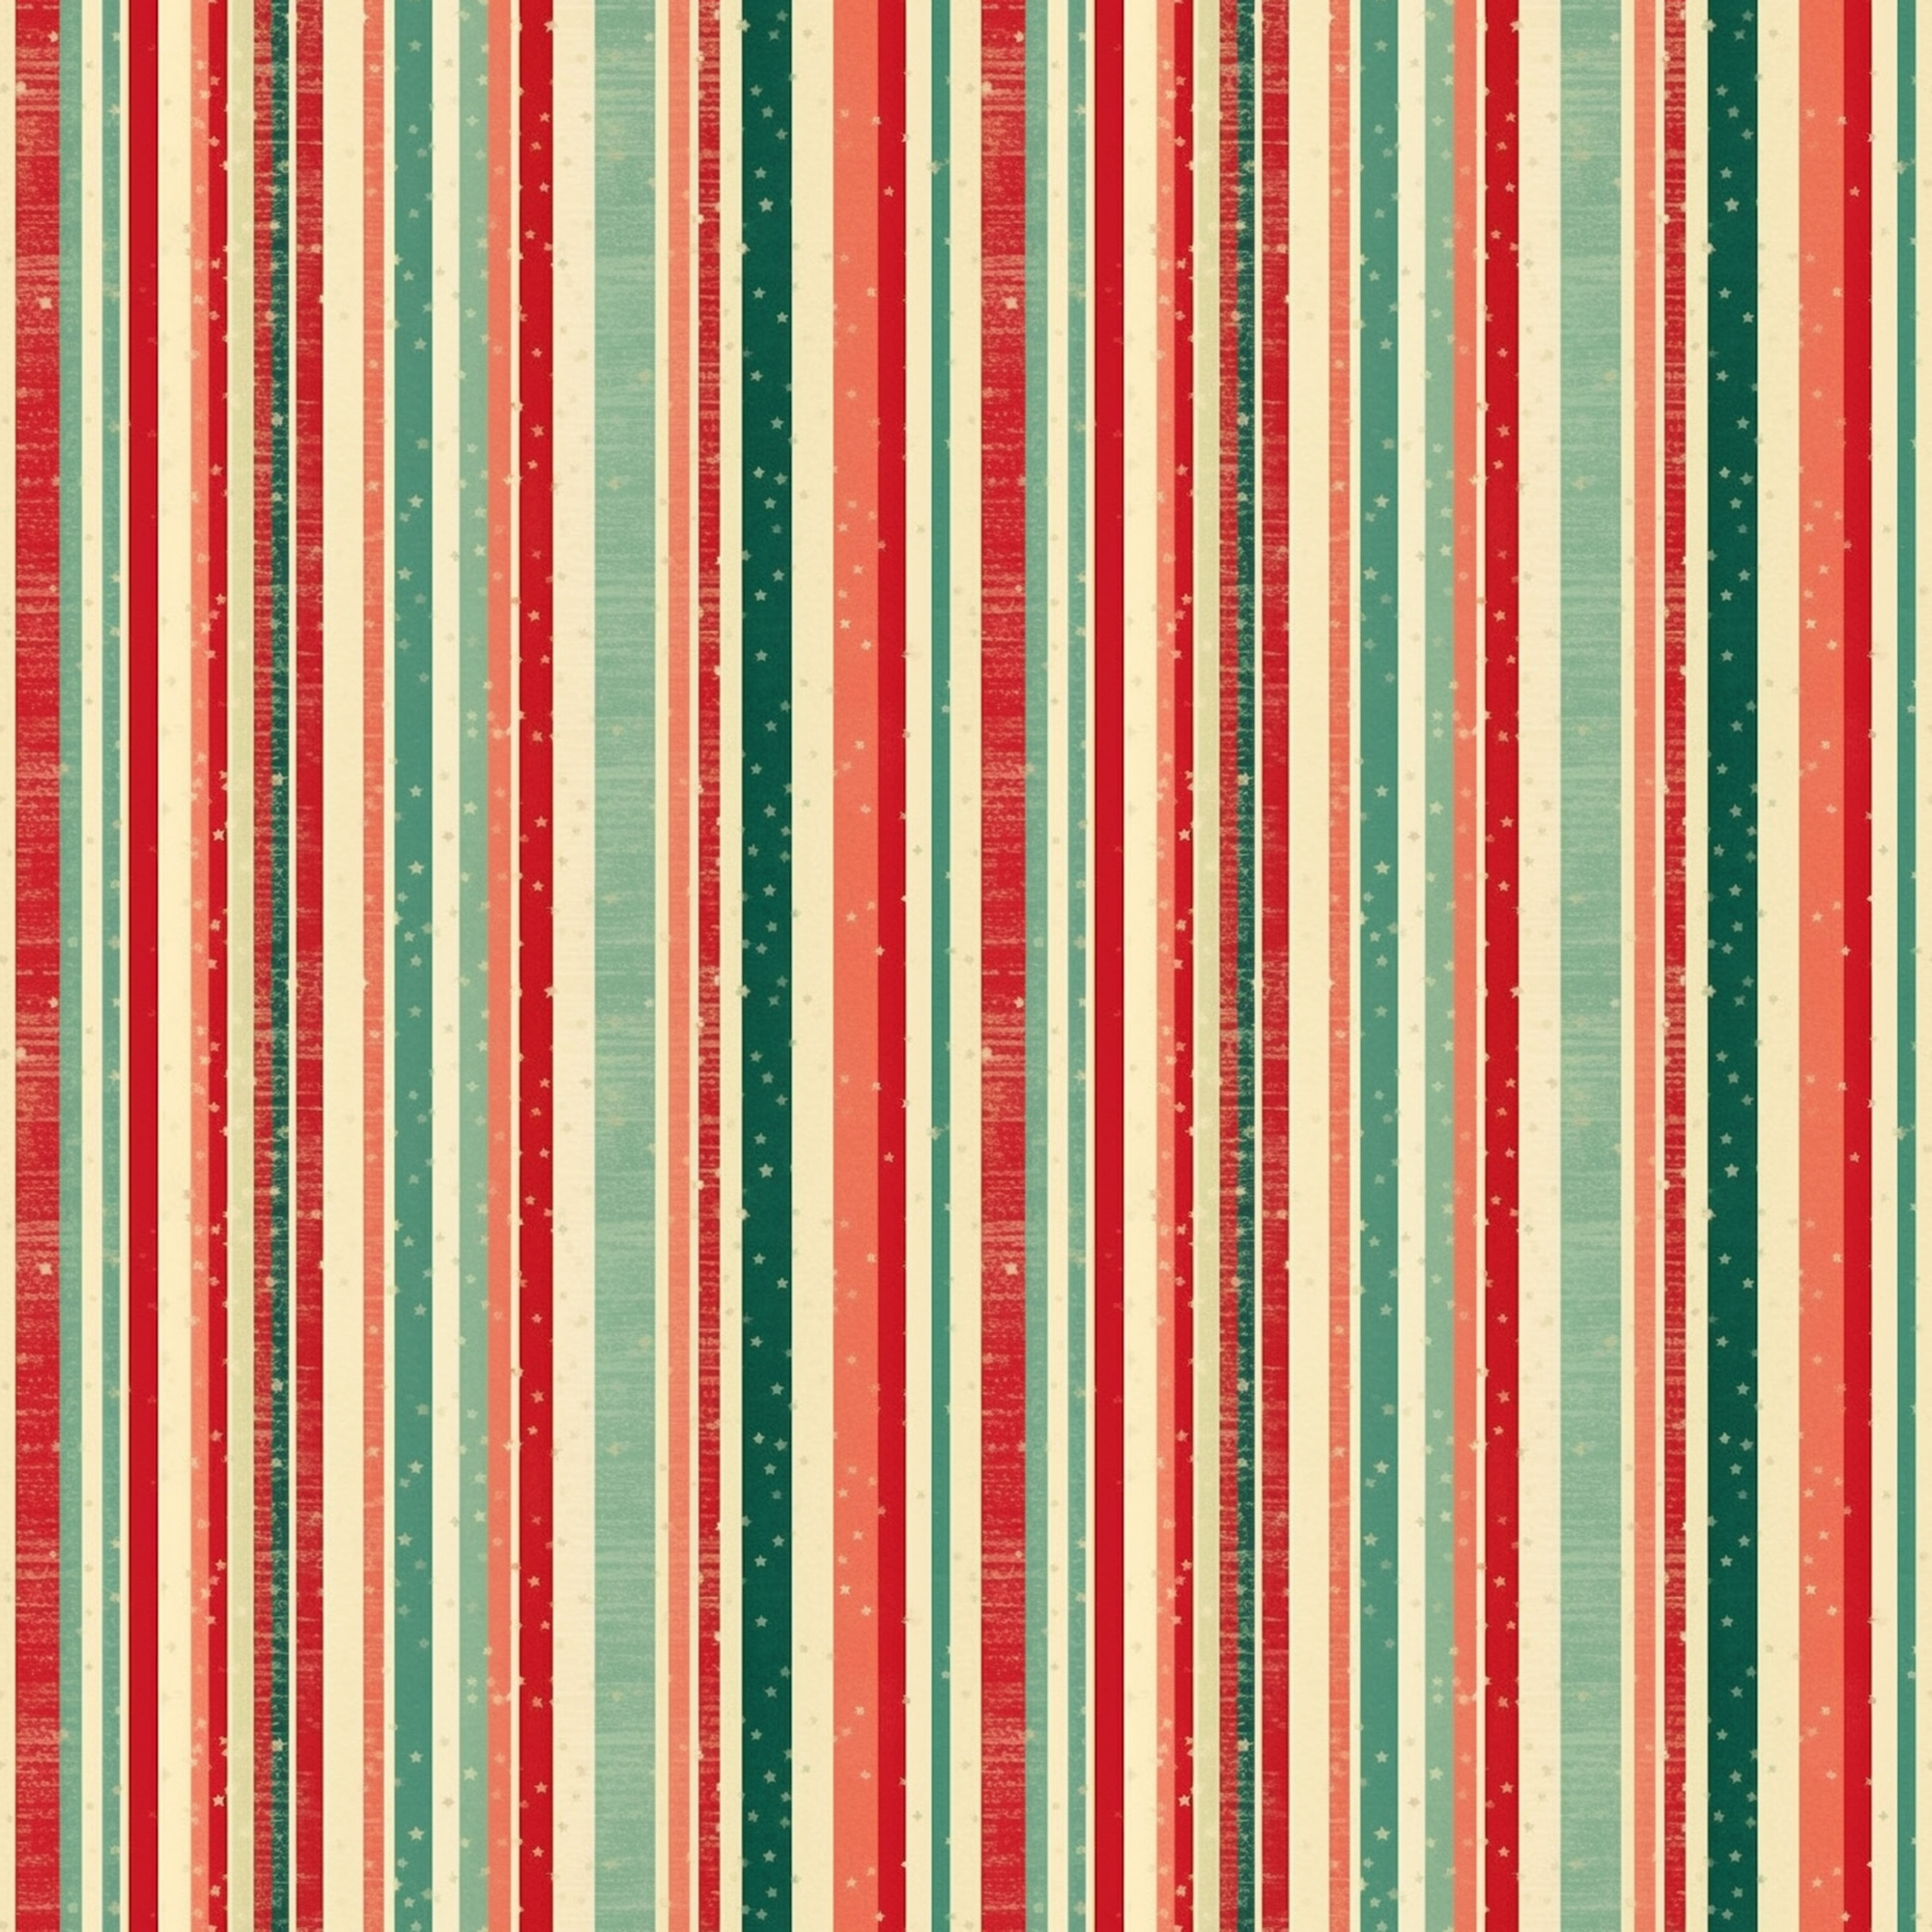 Cowboy Christmas Collection Barrels of Christmas Joy 12 x 12 Double-Sided Scrapbook Paper by SSC Designs